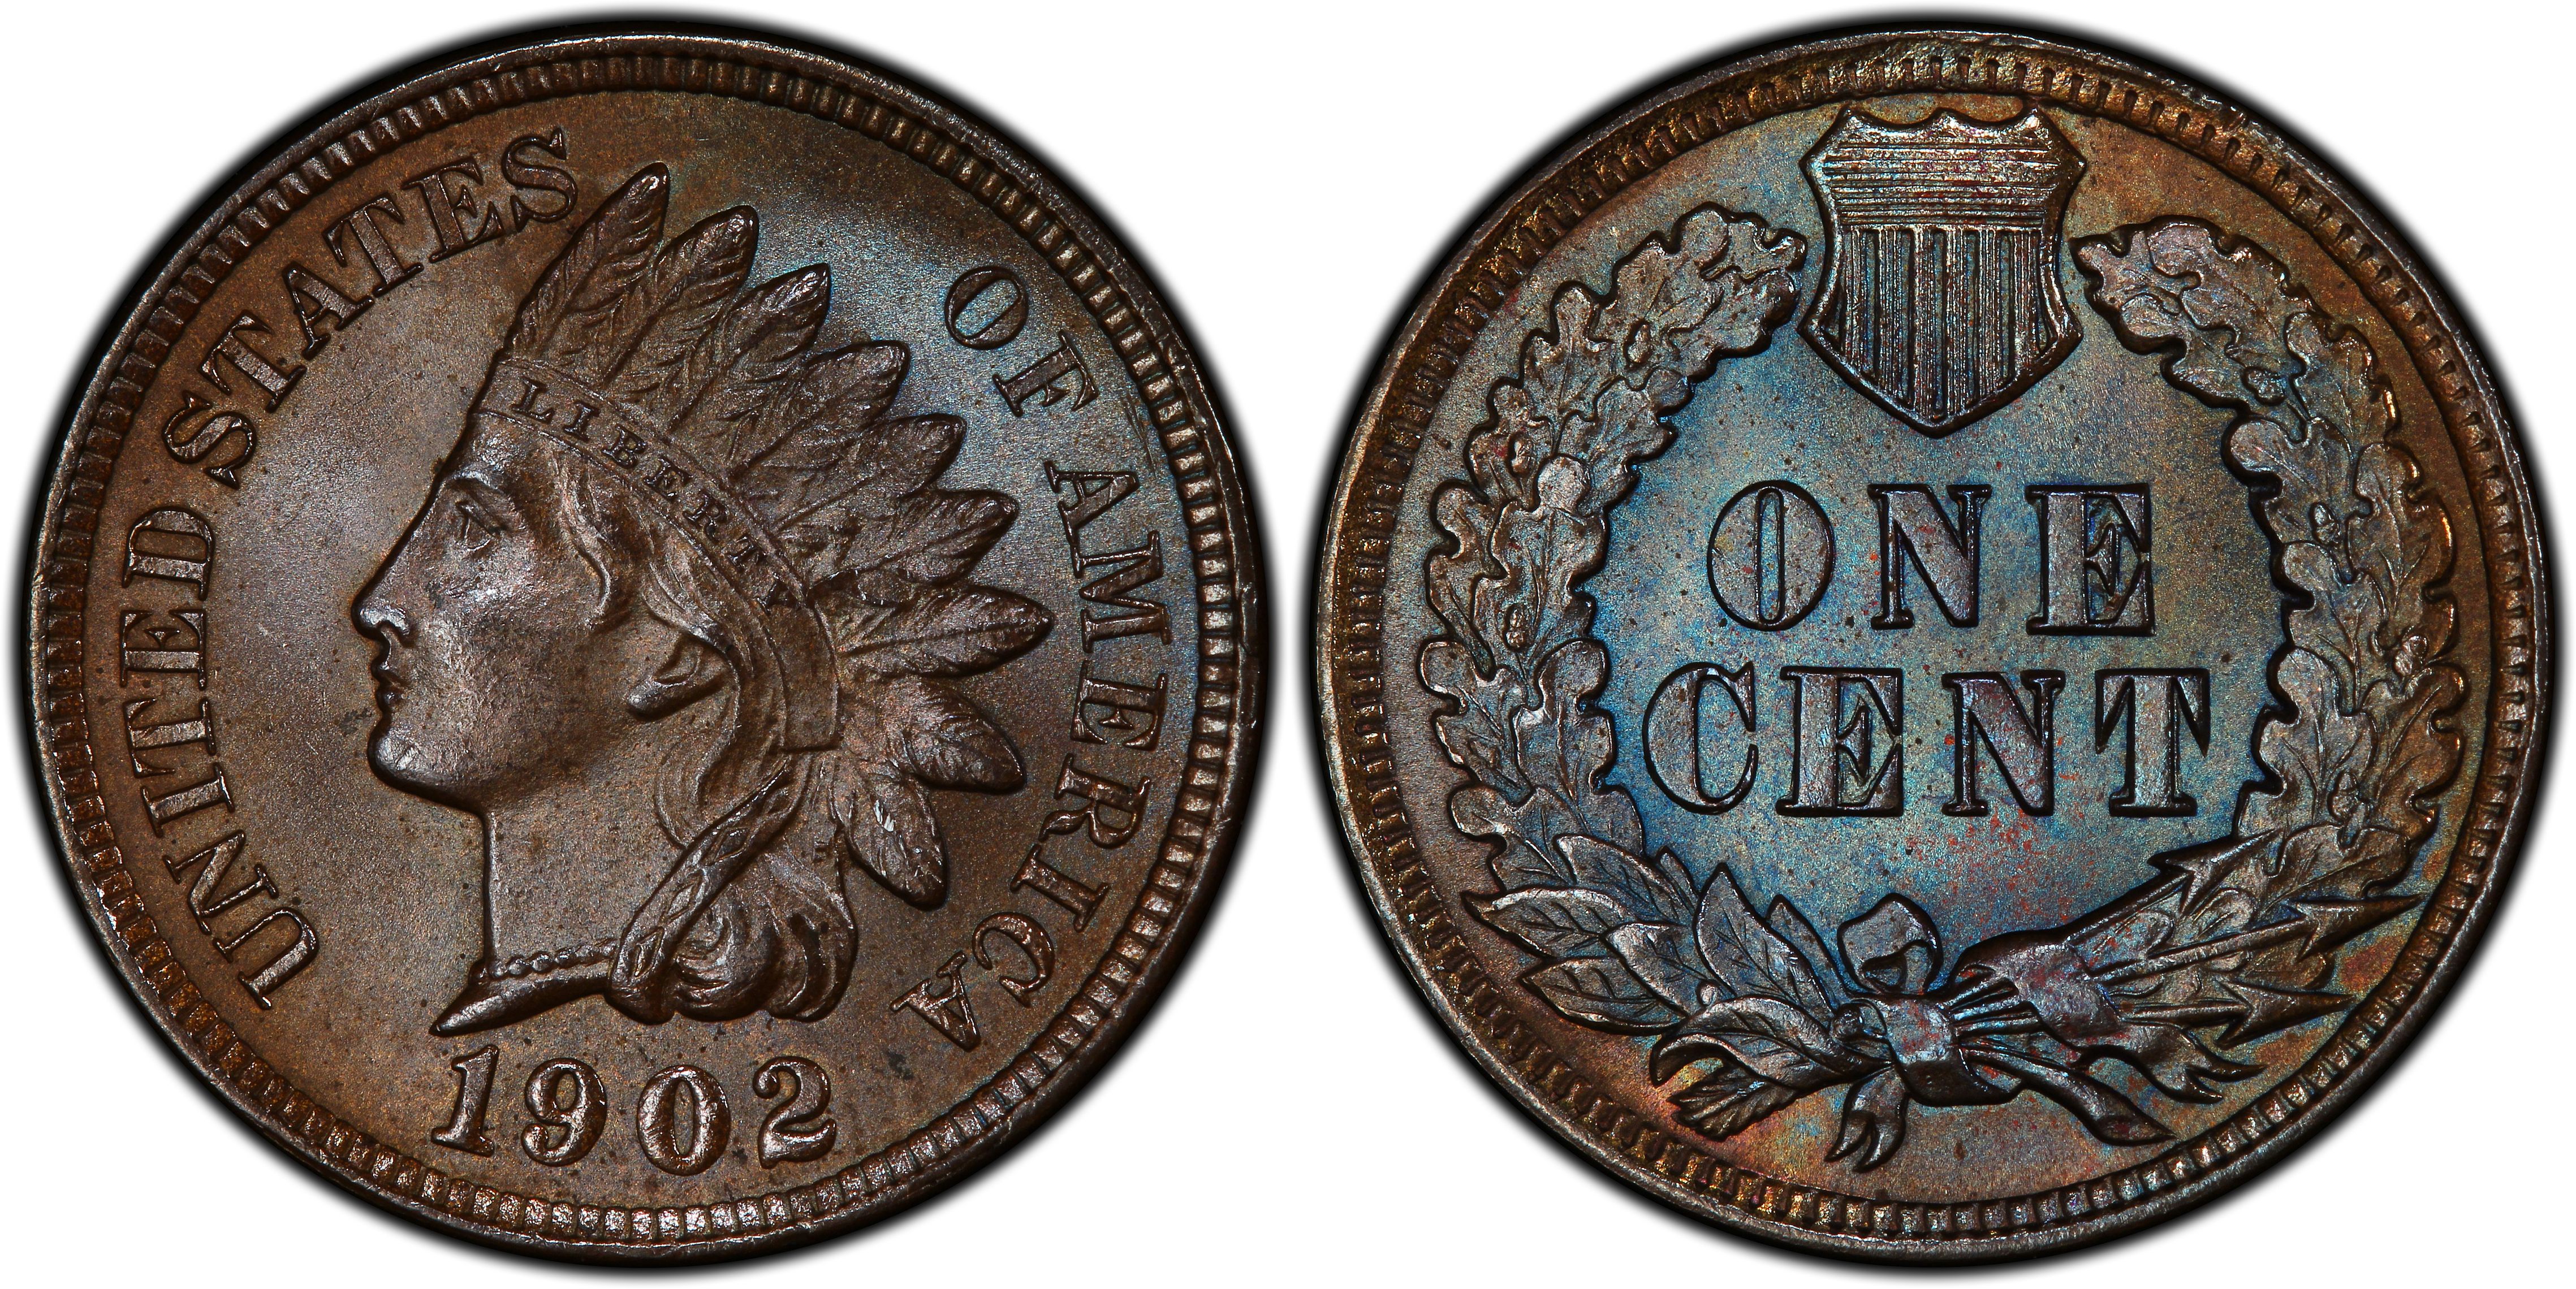 https://images.pcgs.com/CoinFacts/32821555_47189027_2200.jpg